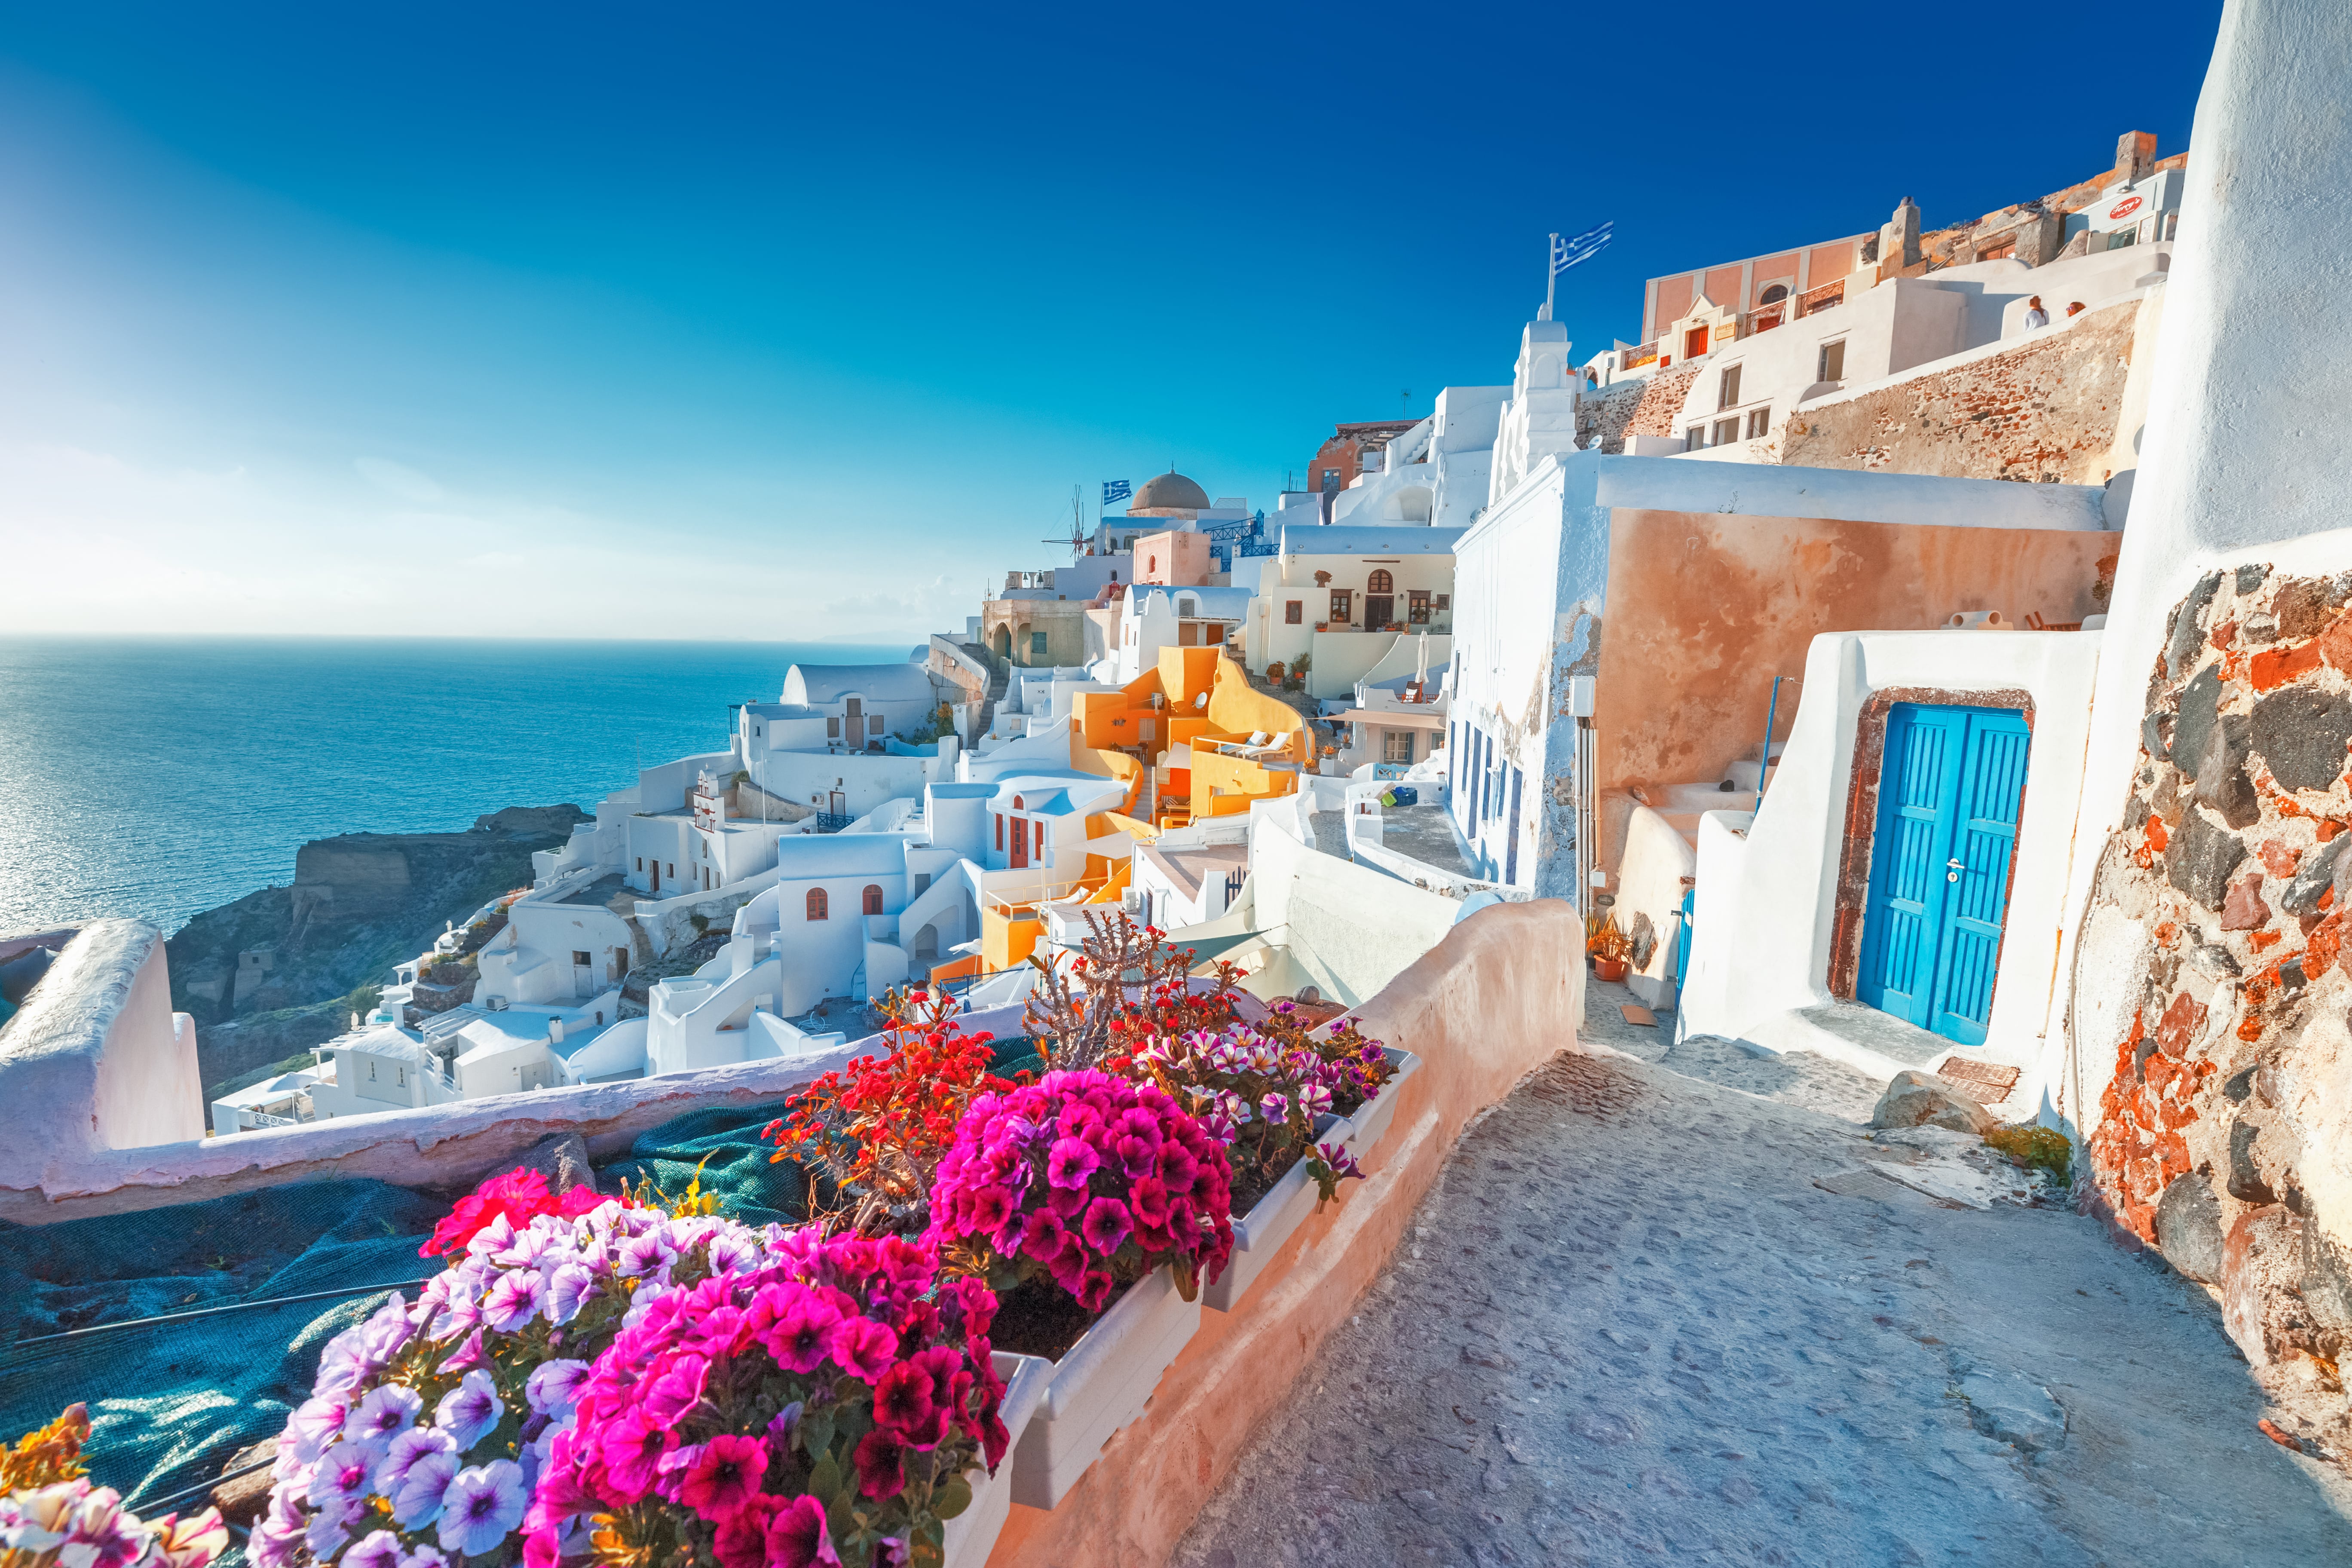 Picture of classic white Greek architecture adorned with pink and purple flowers overlooking the coast